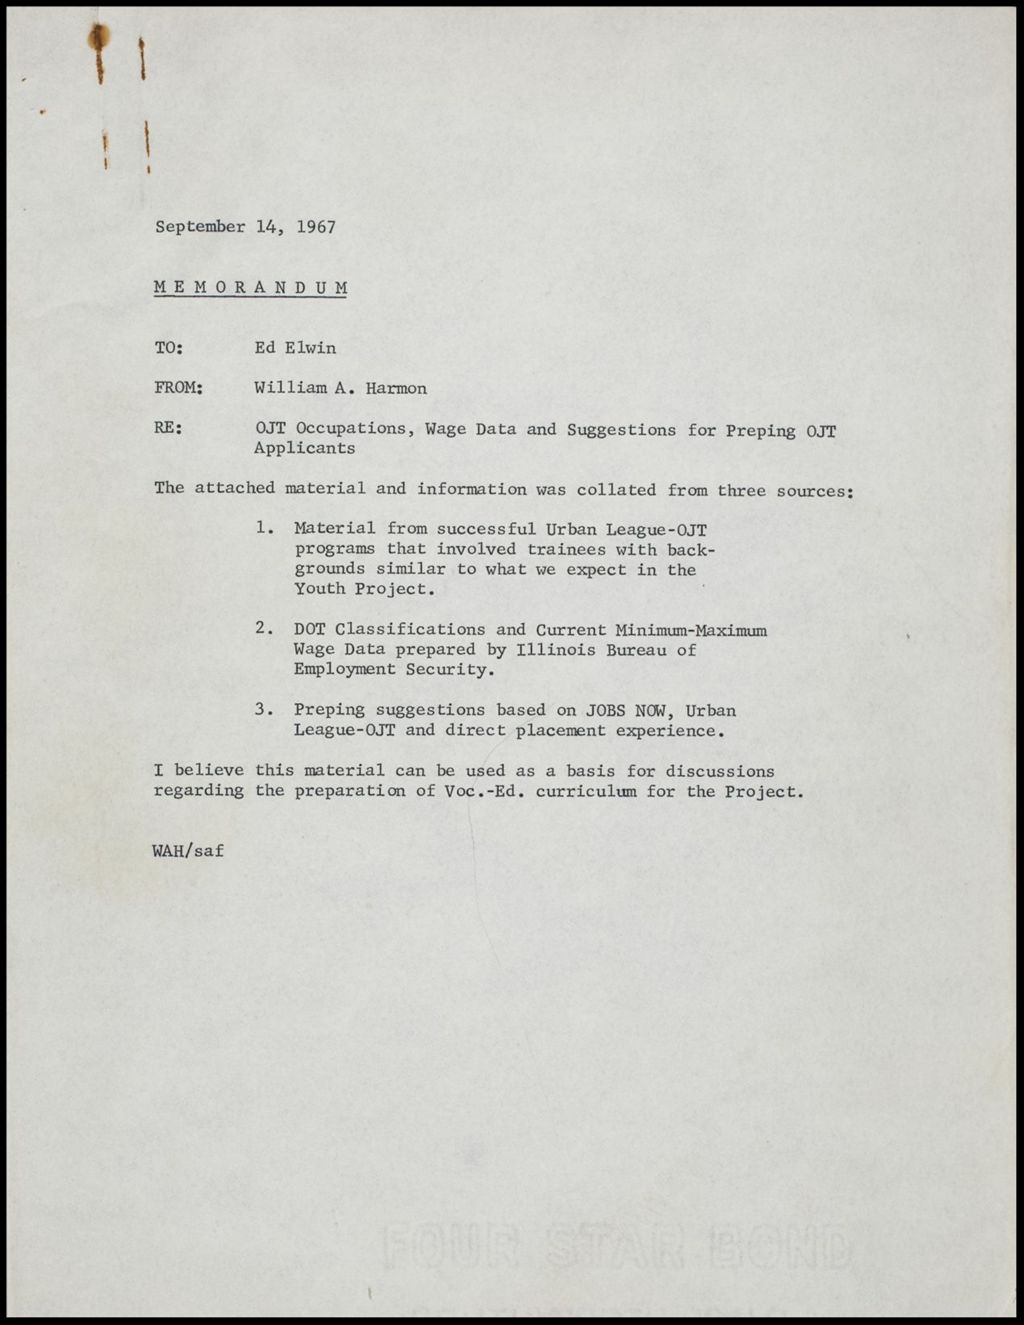 Occupations, Wage data and Suggestions for Prepping Applications, 1967 (Folder II-82)